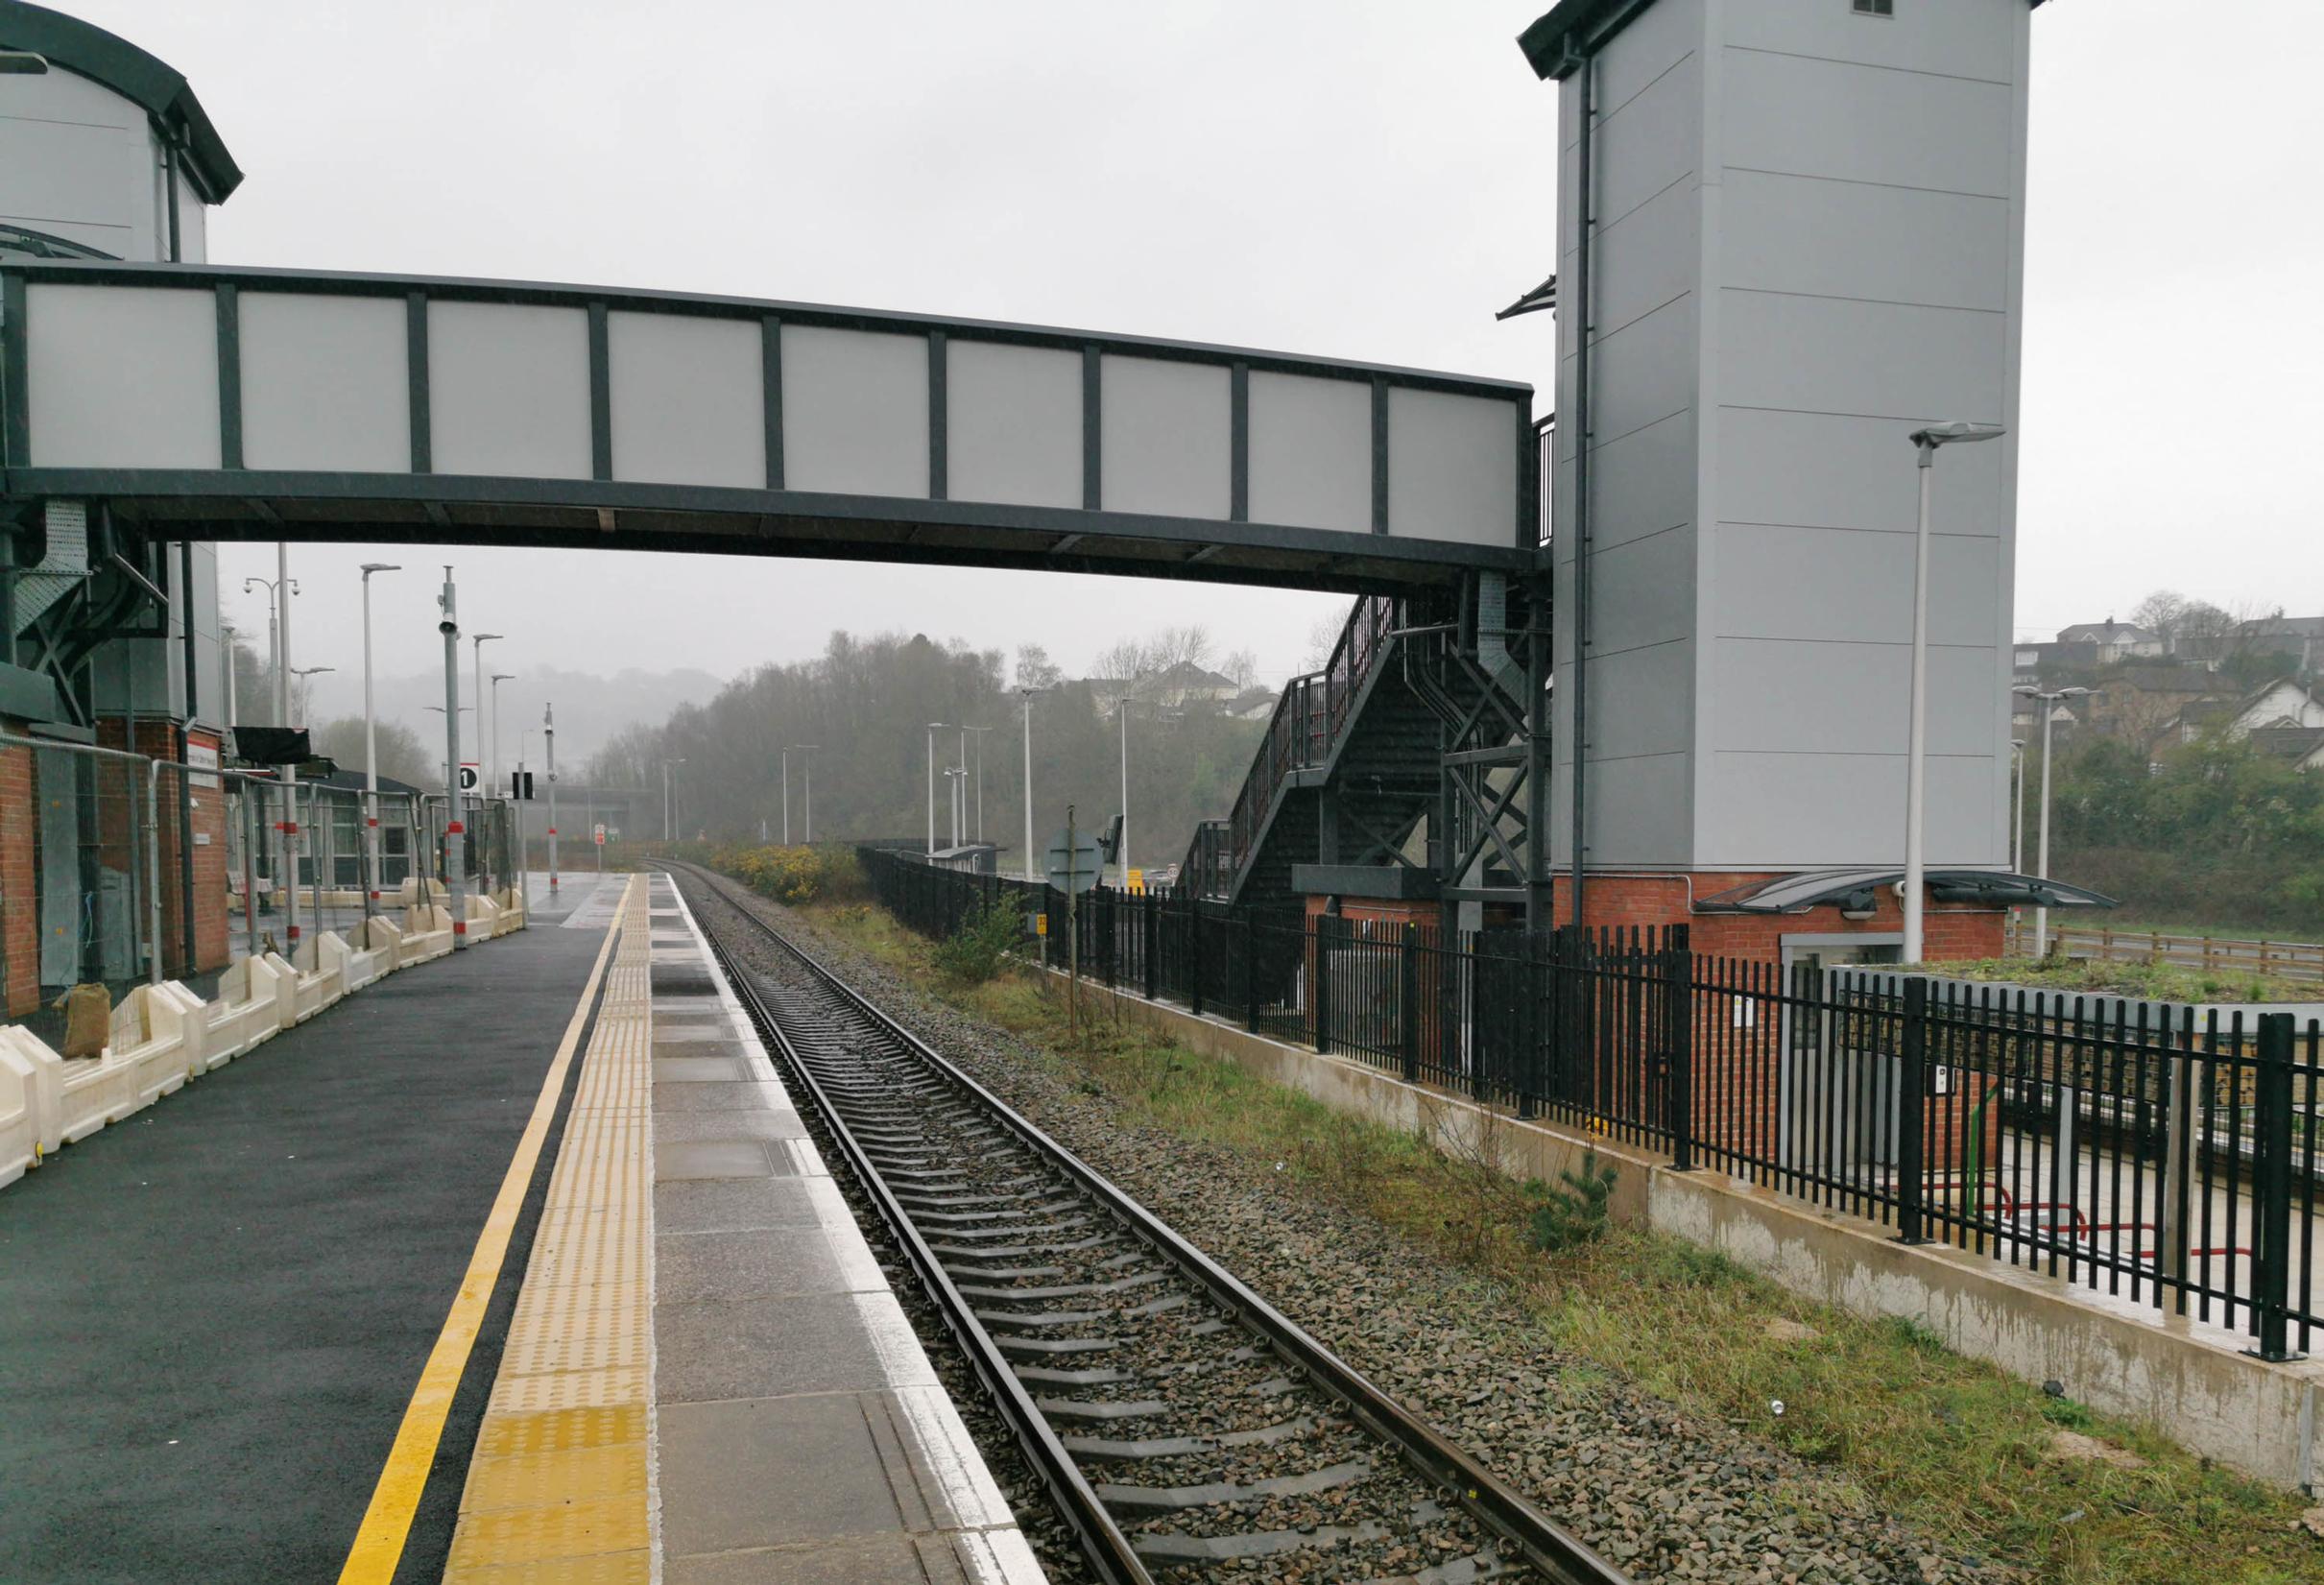 The new cycle parking stands at Pontypool & New Inn interchange are visible beyond the fence on the right, and the new bus shelter further along. The footbridge with lifts will be accessible to car users when it opens